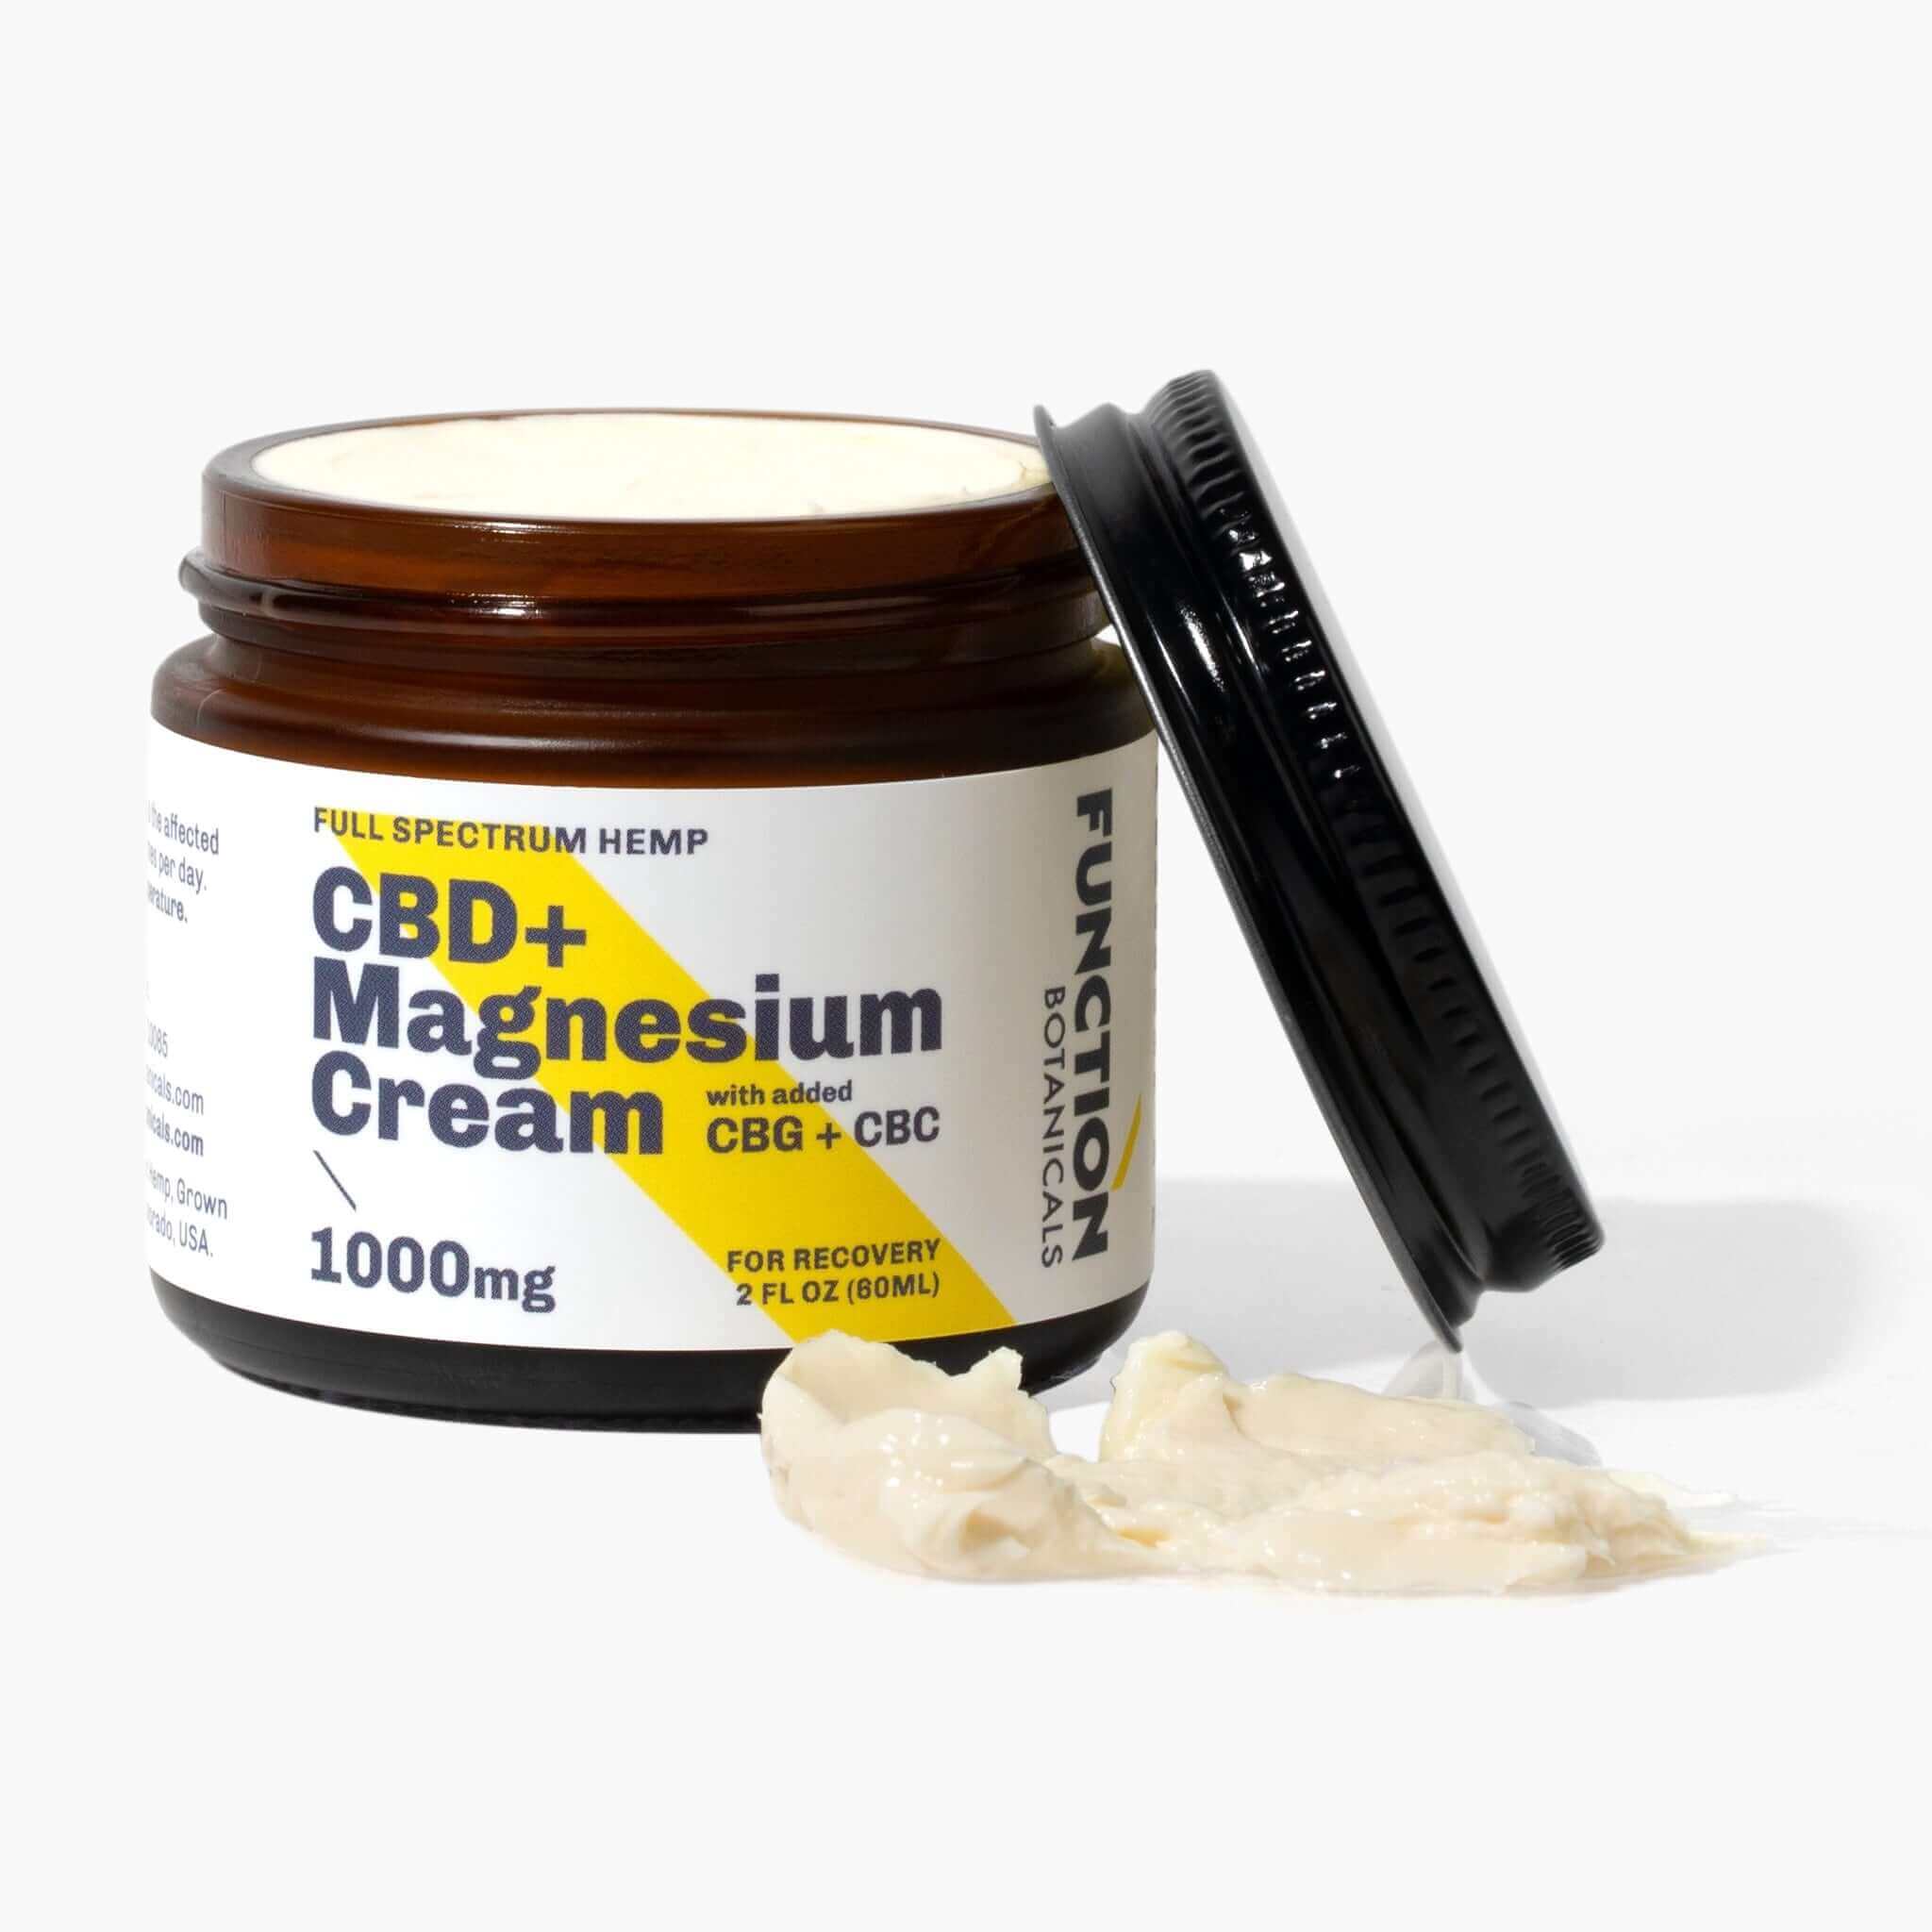 CBD and Magnesium Cream for Muscle and Joint Pain